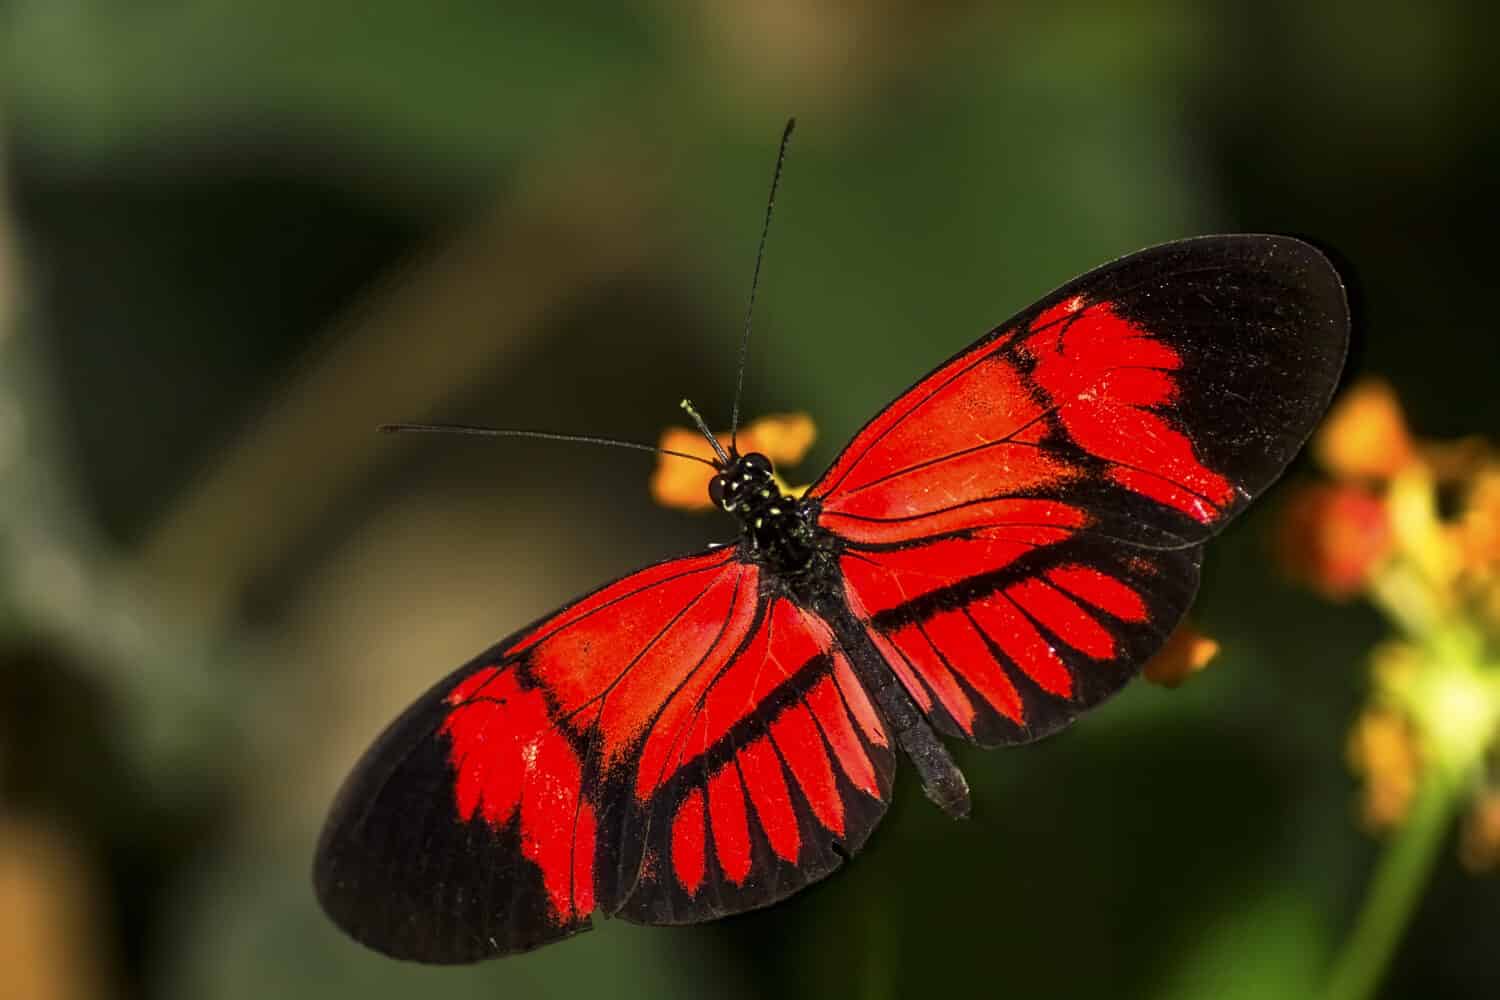 The Postman butterfly or Common postman butterfly (Heliconius melpomene)